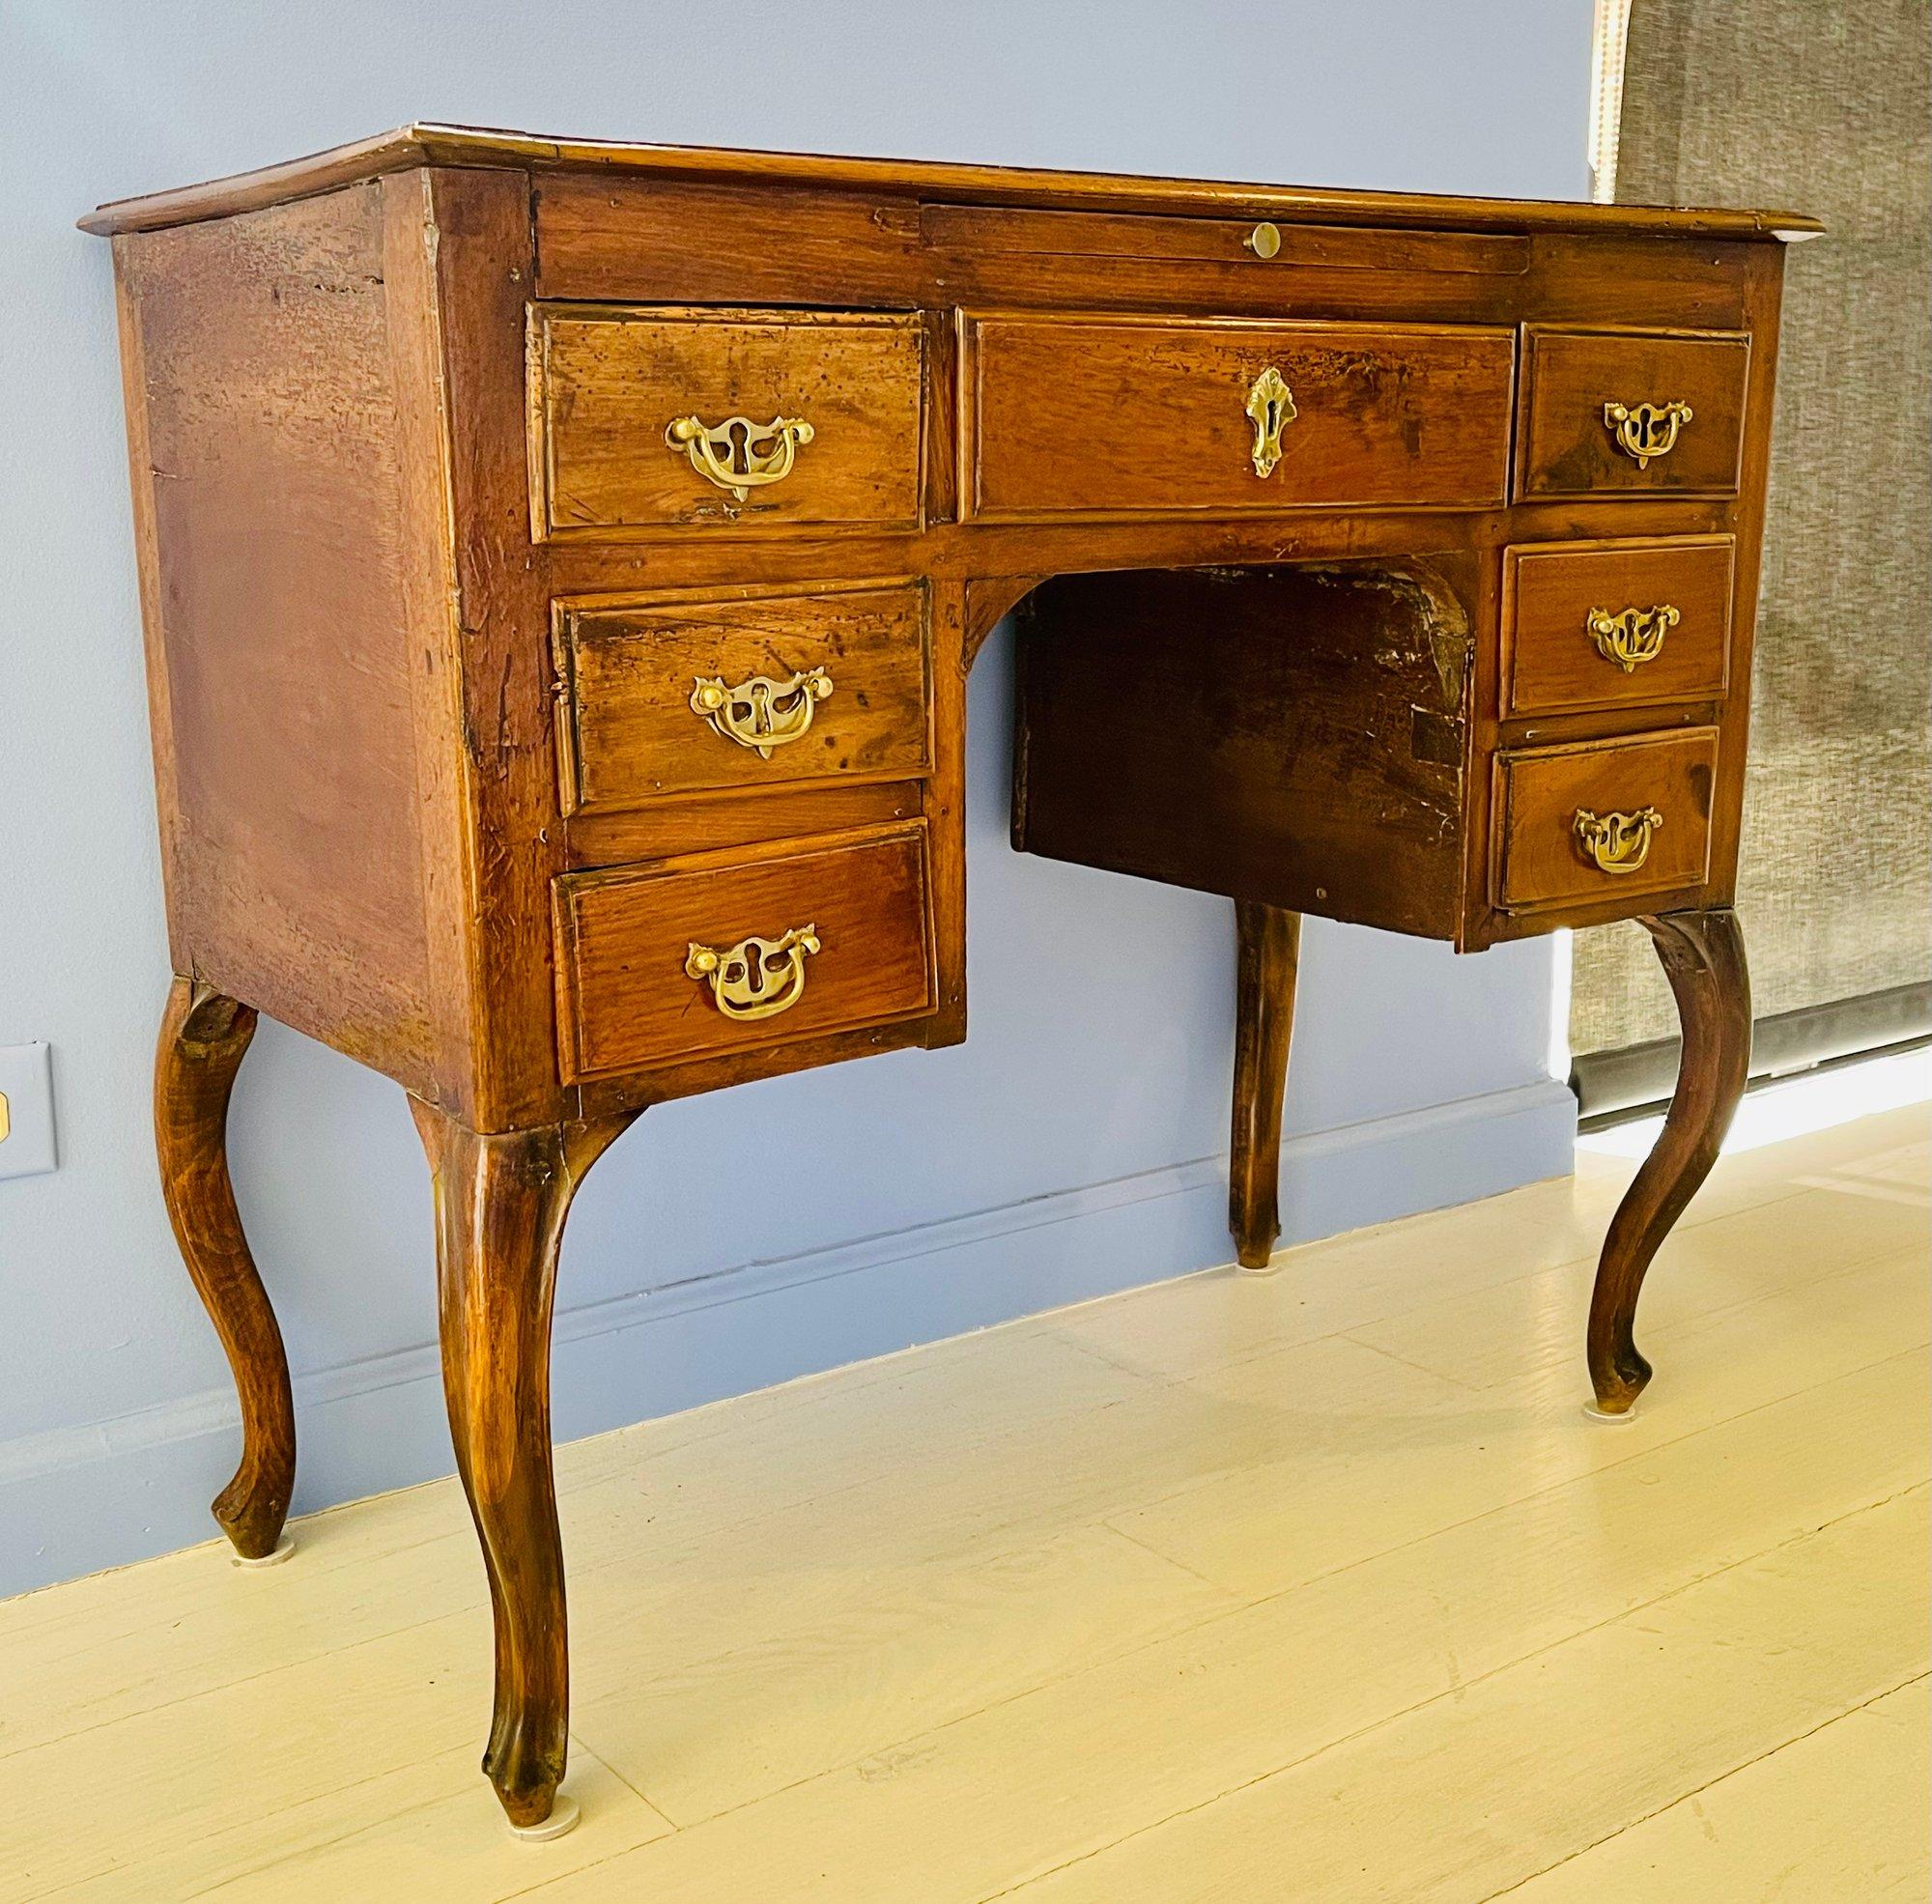 Antique small writing desk on cabriole legs with original brass hardware. Desk features 7 drawers and pull out slide on the front.

Dimensions
32.5